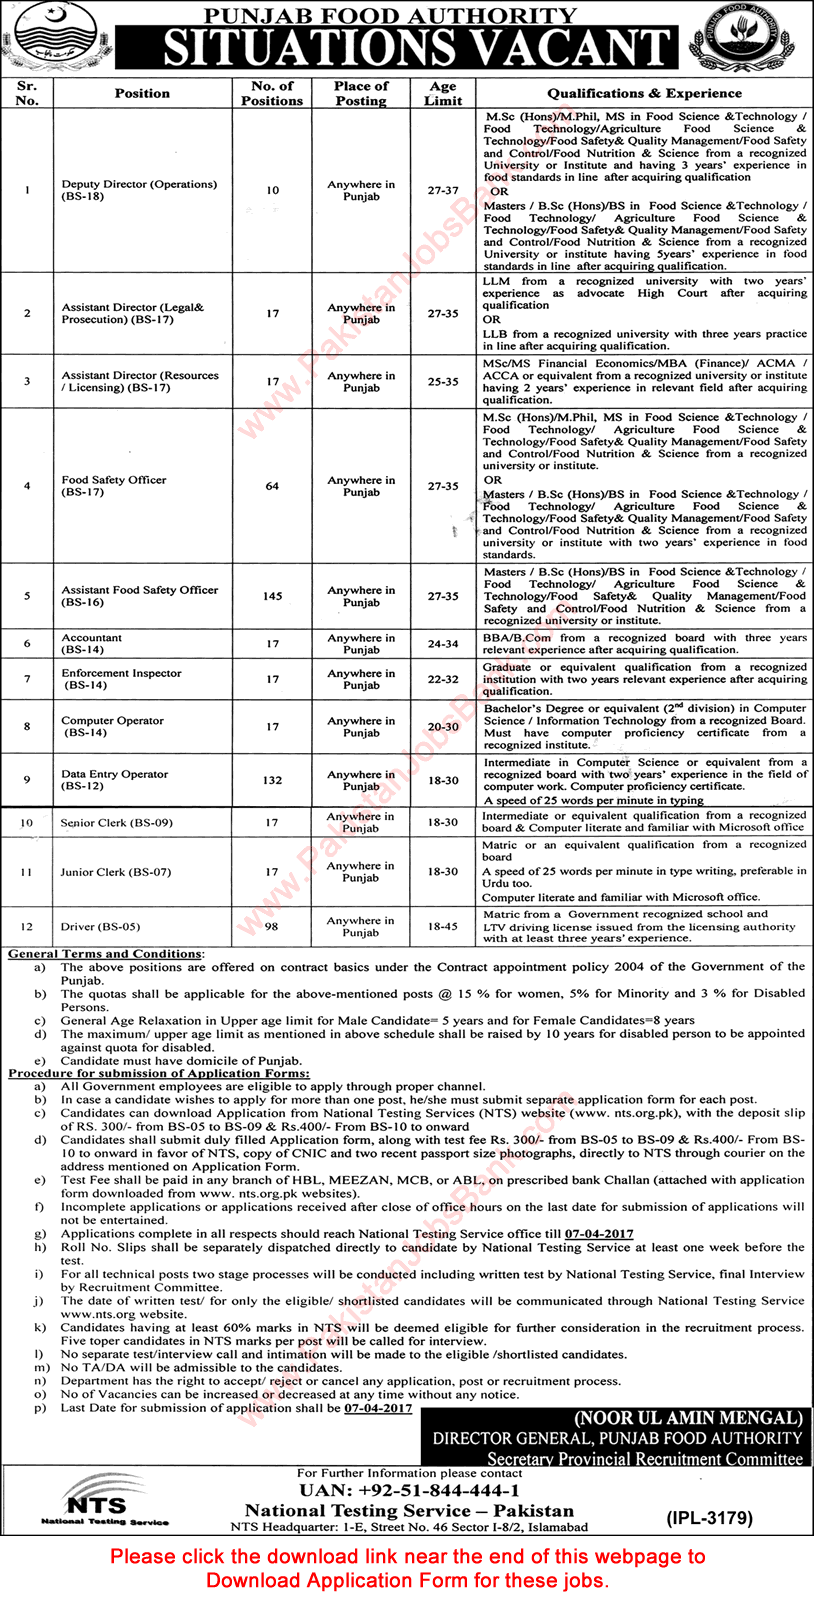 Punjab Food Authority Jobs March 2017 NTS Application Form Food Safety Officers, Data Entry Operators & Others Latest